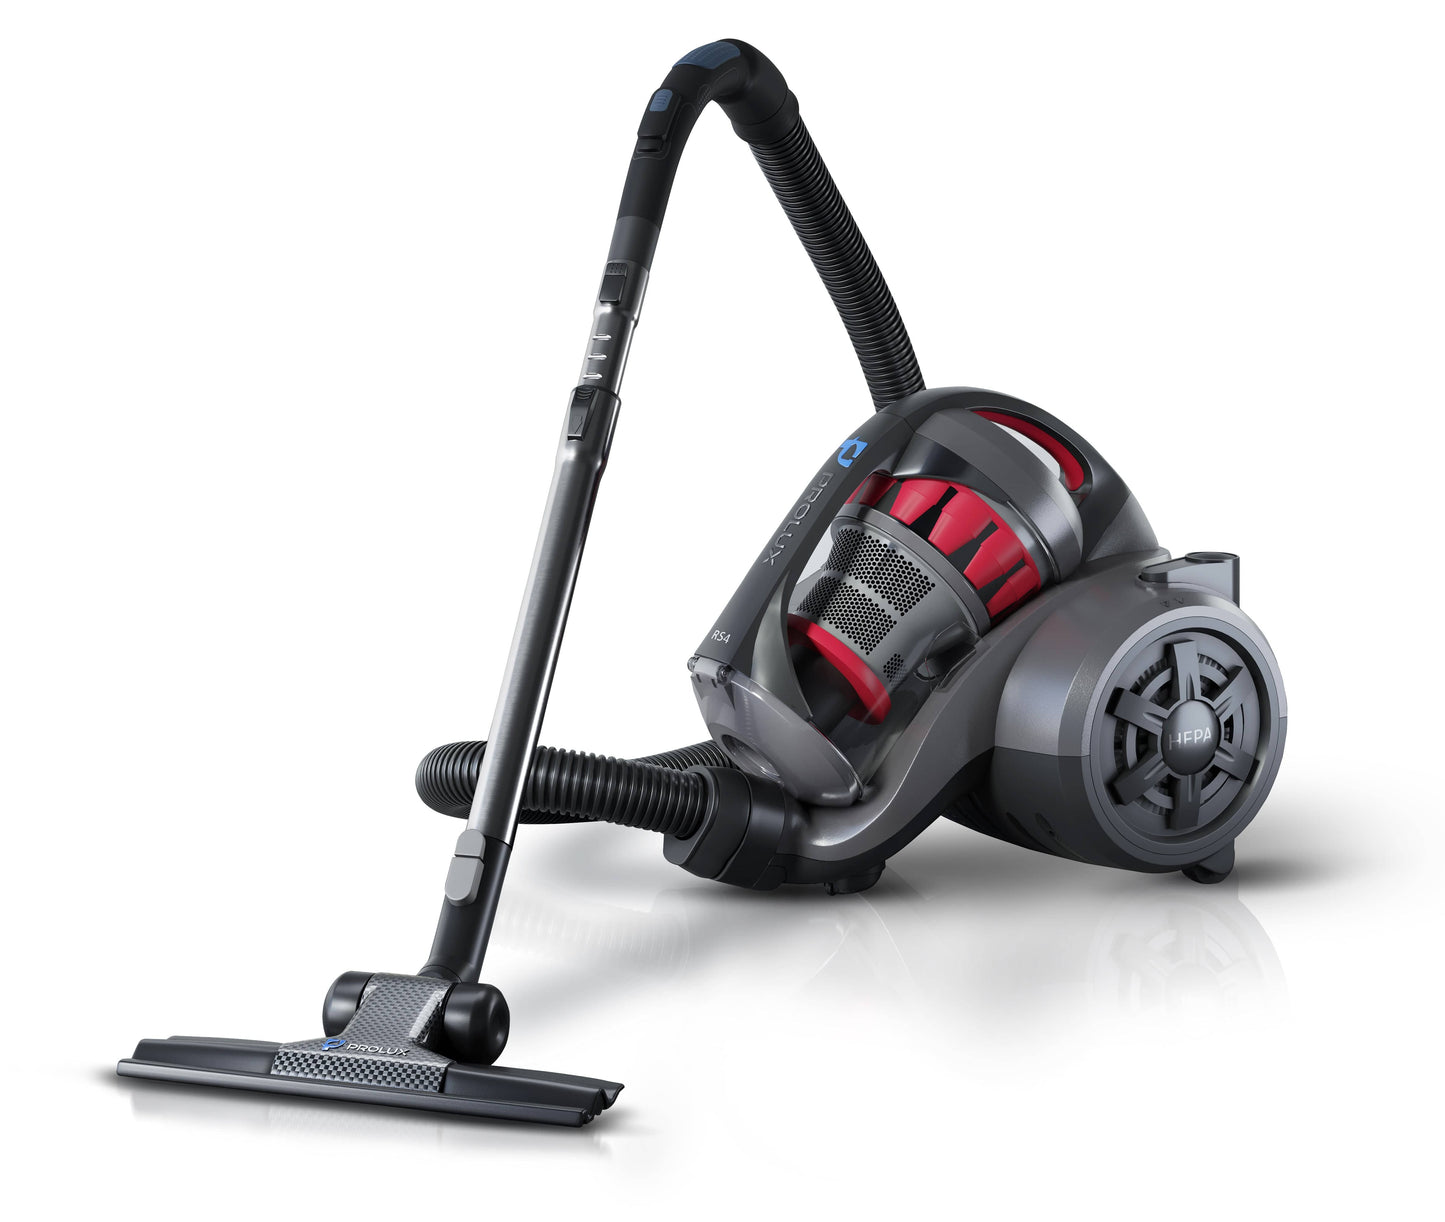 Prolux RS4 Lightweight Bagless Canister Vacuum with HEPA Filtration Premium Button Lock Tools and Automatic Cord Rewind